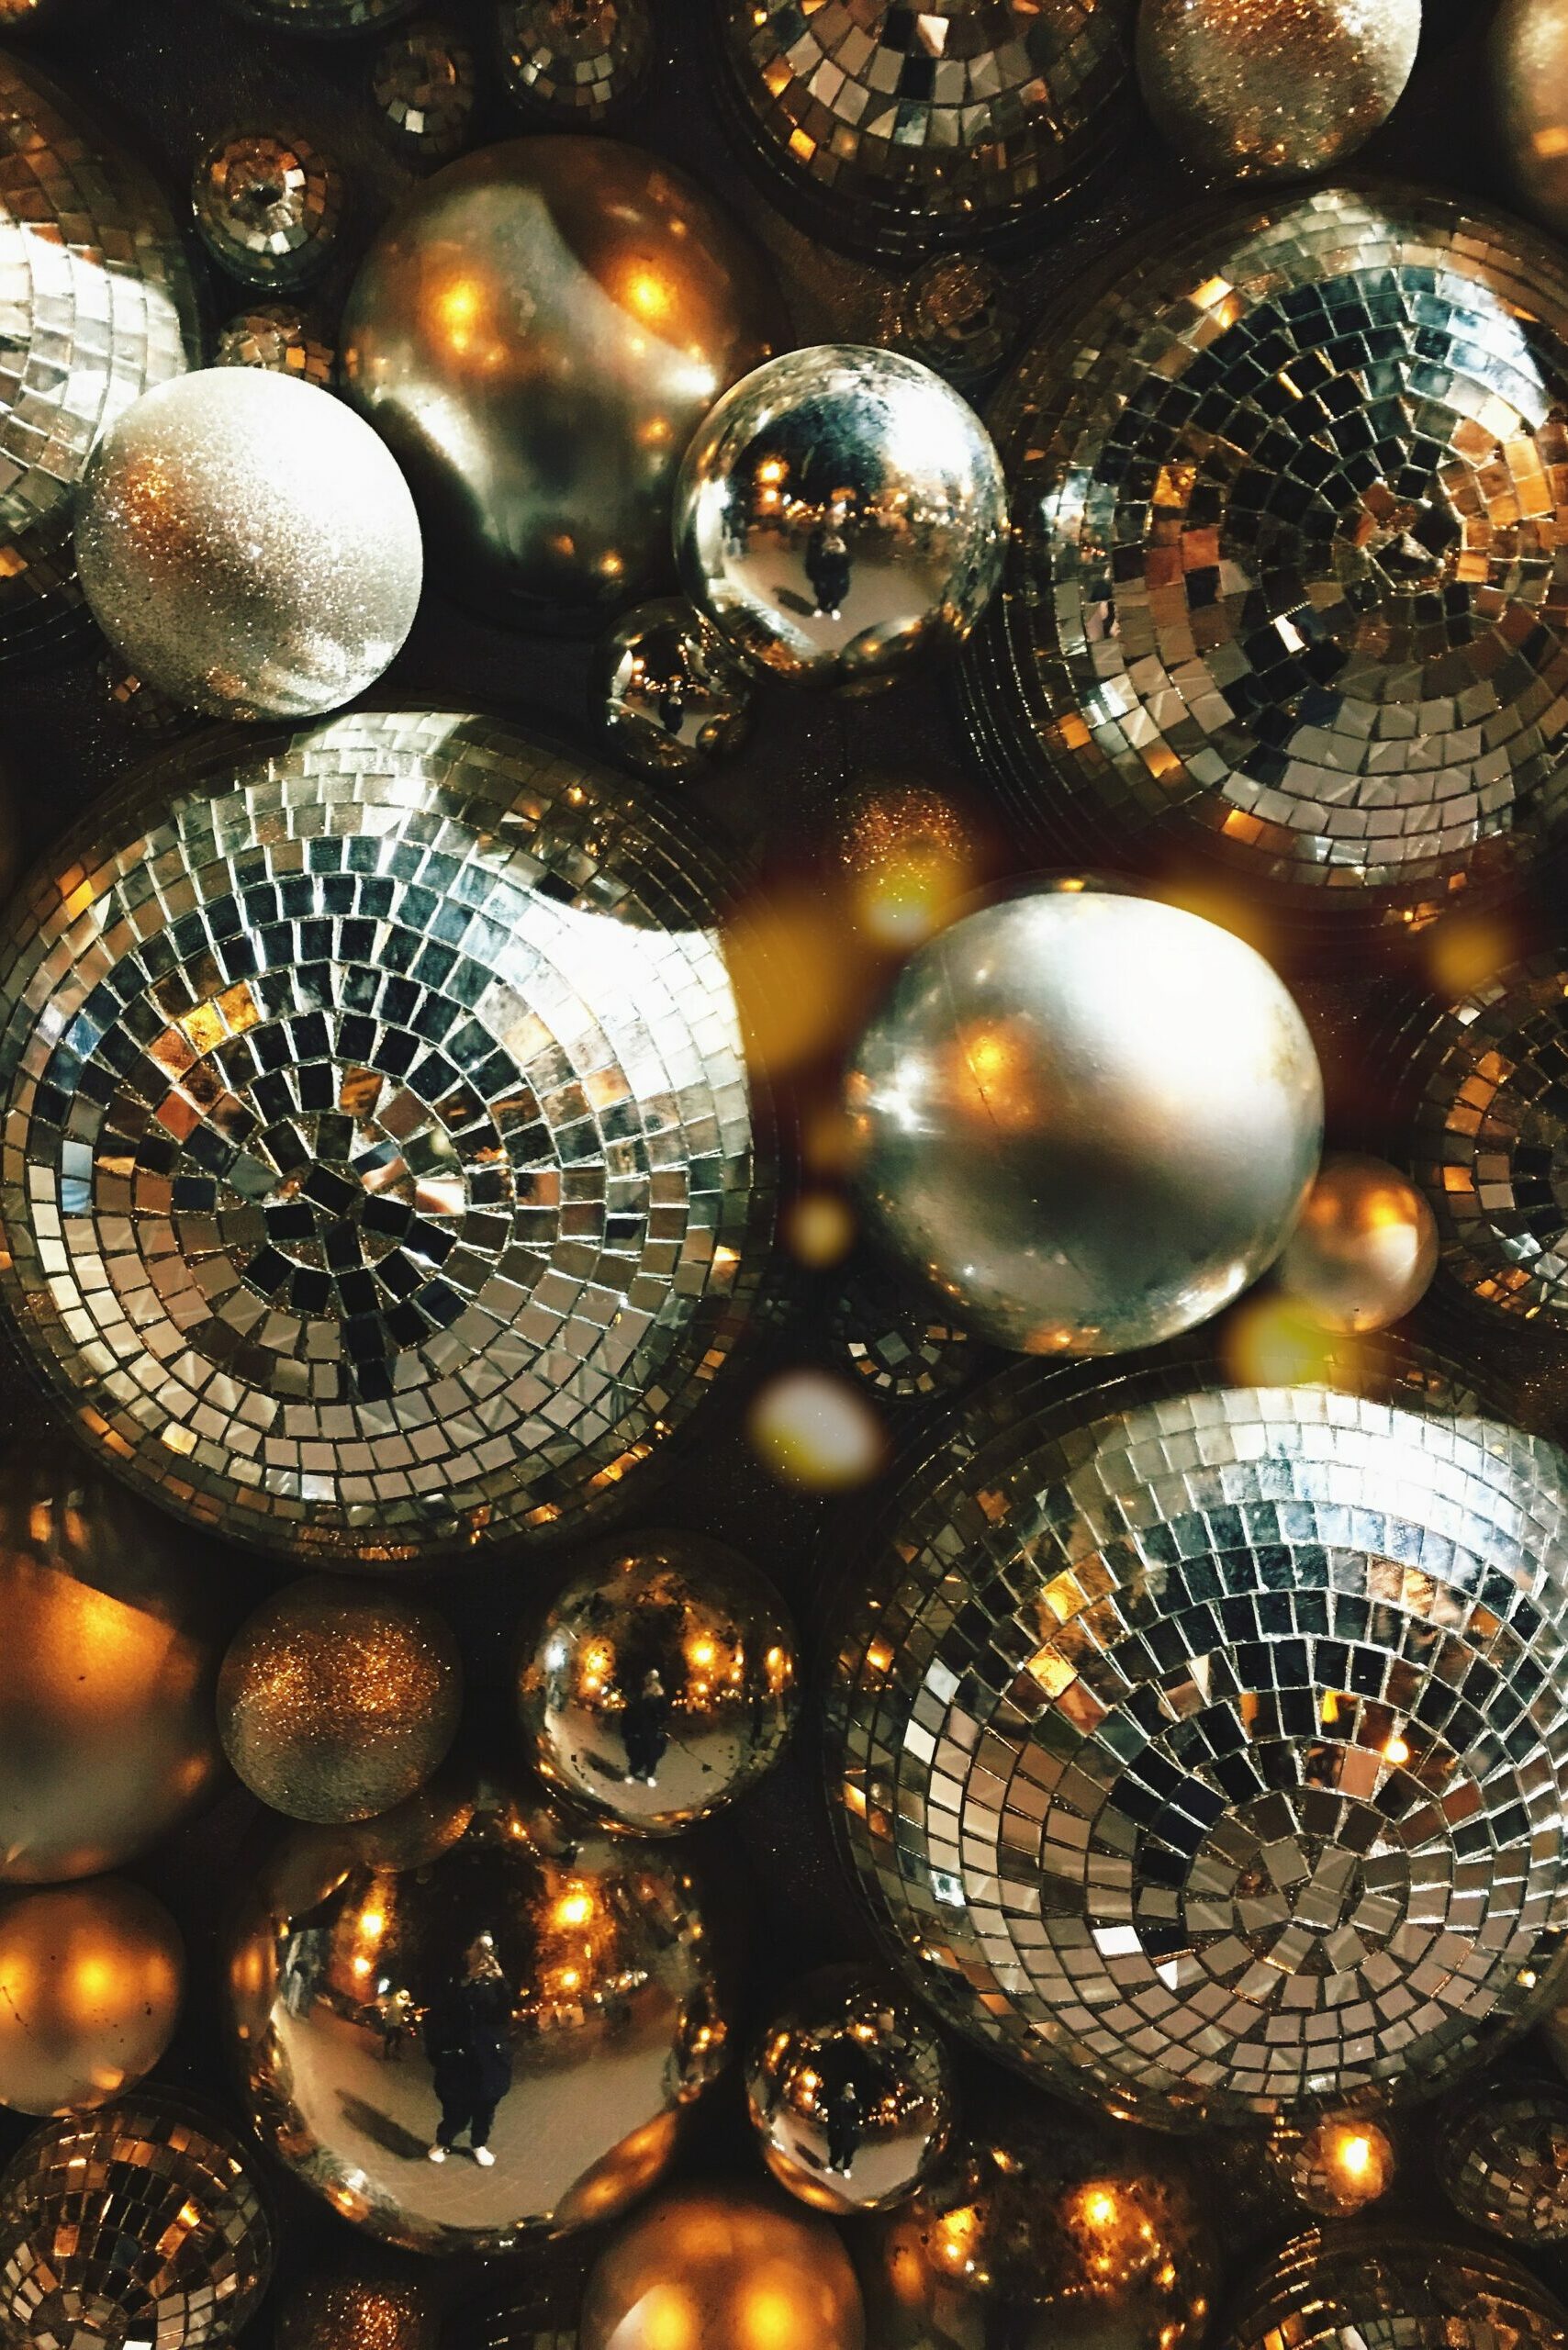 Disco balls of varying sizes have been hung together and are viewed from below.